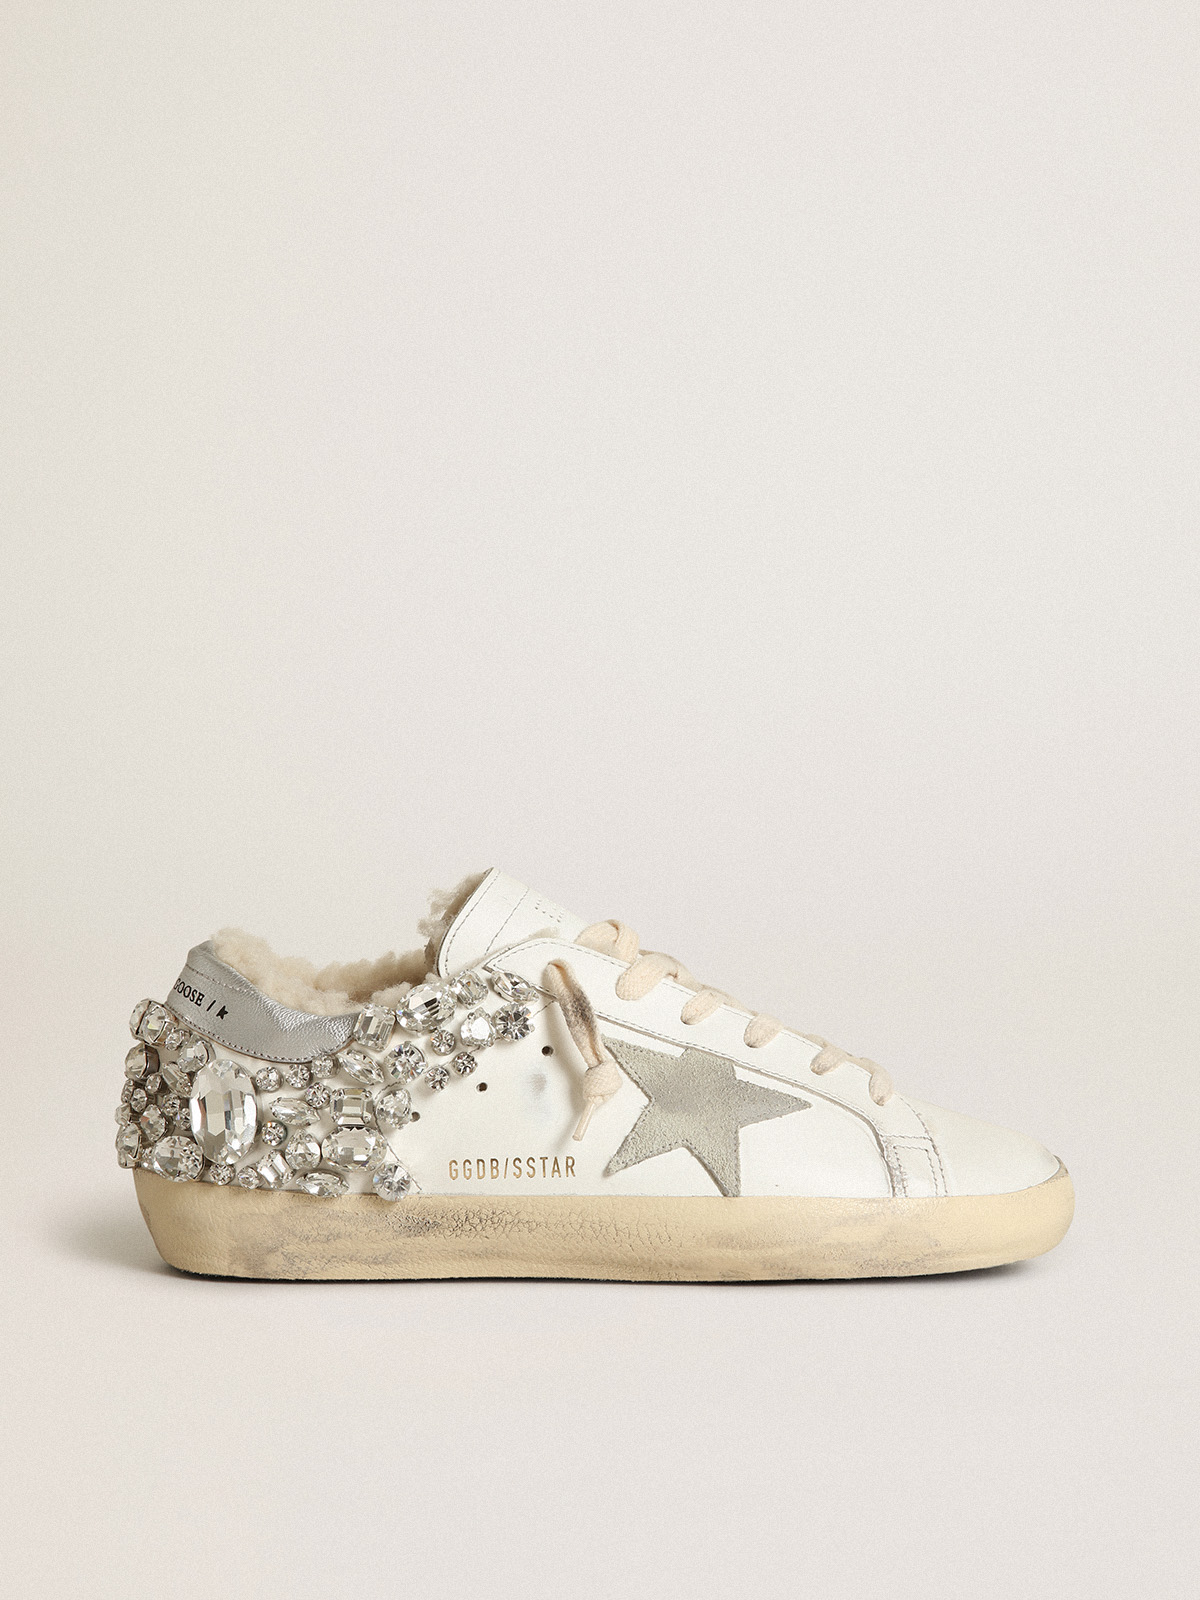 Super-Star sneakers with shearling lining and decorative crystals